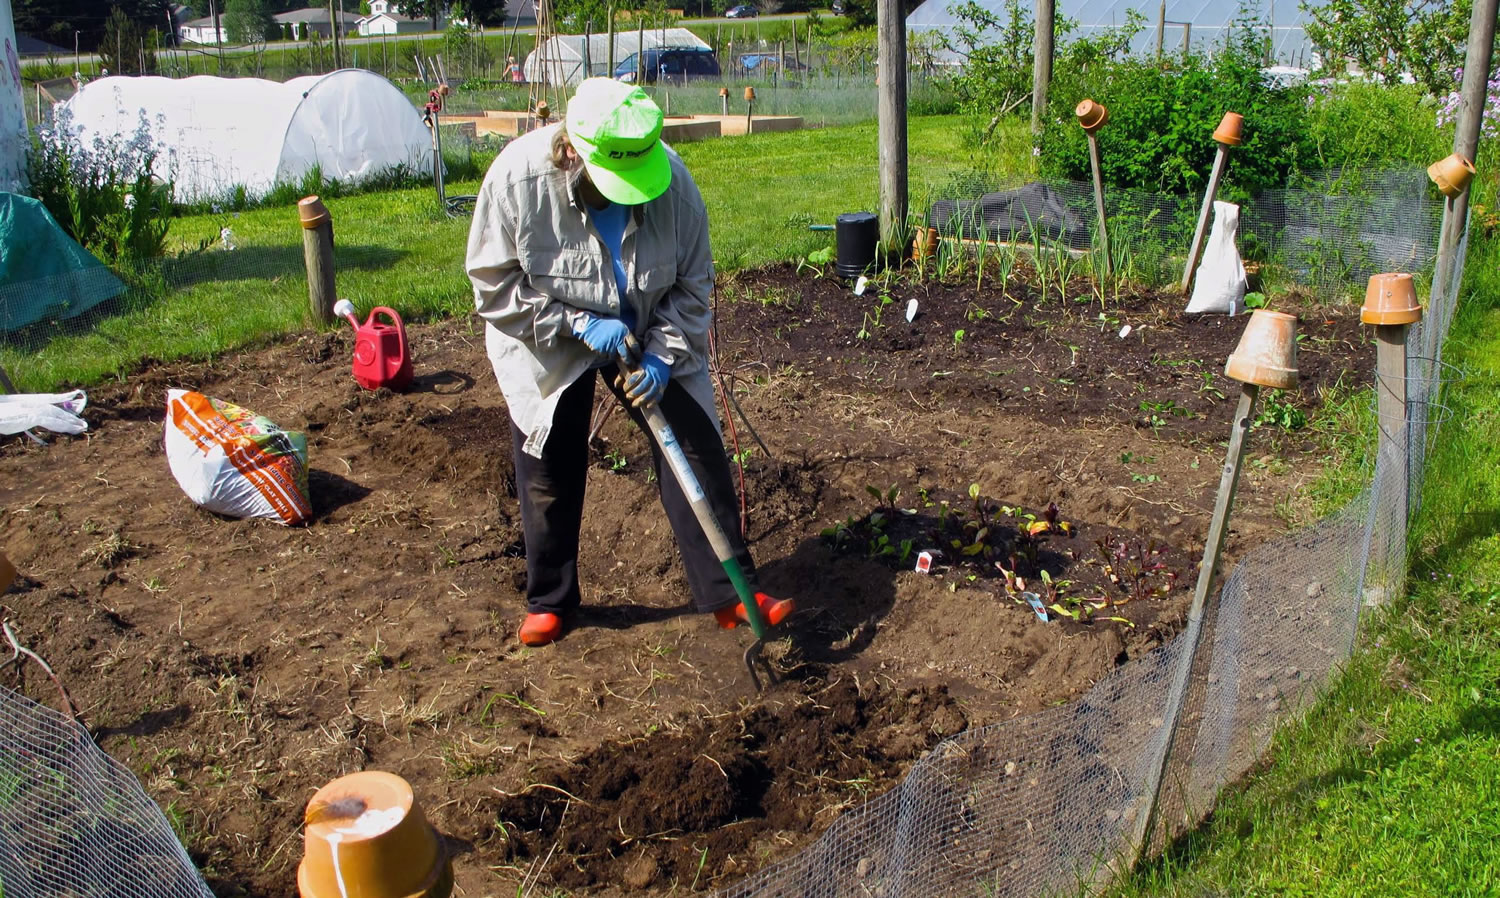 Associated Press files
A gardener prepares the soil for planting last spring in her designated plot at the South Whidbey Demonstration and Community Garden near Langley. She added fertilizer and some other soil amendments before putting cool-season vegetables into the ground.